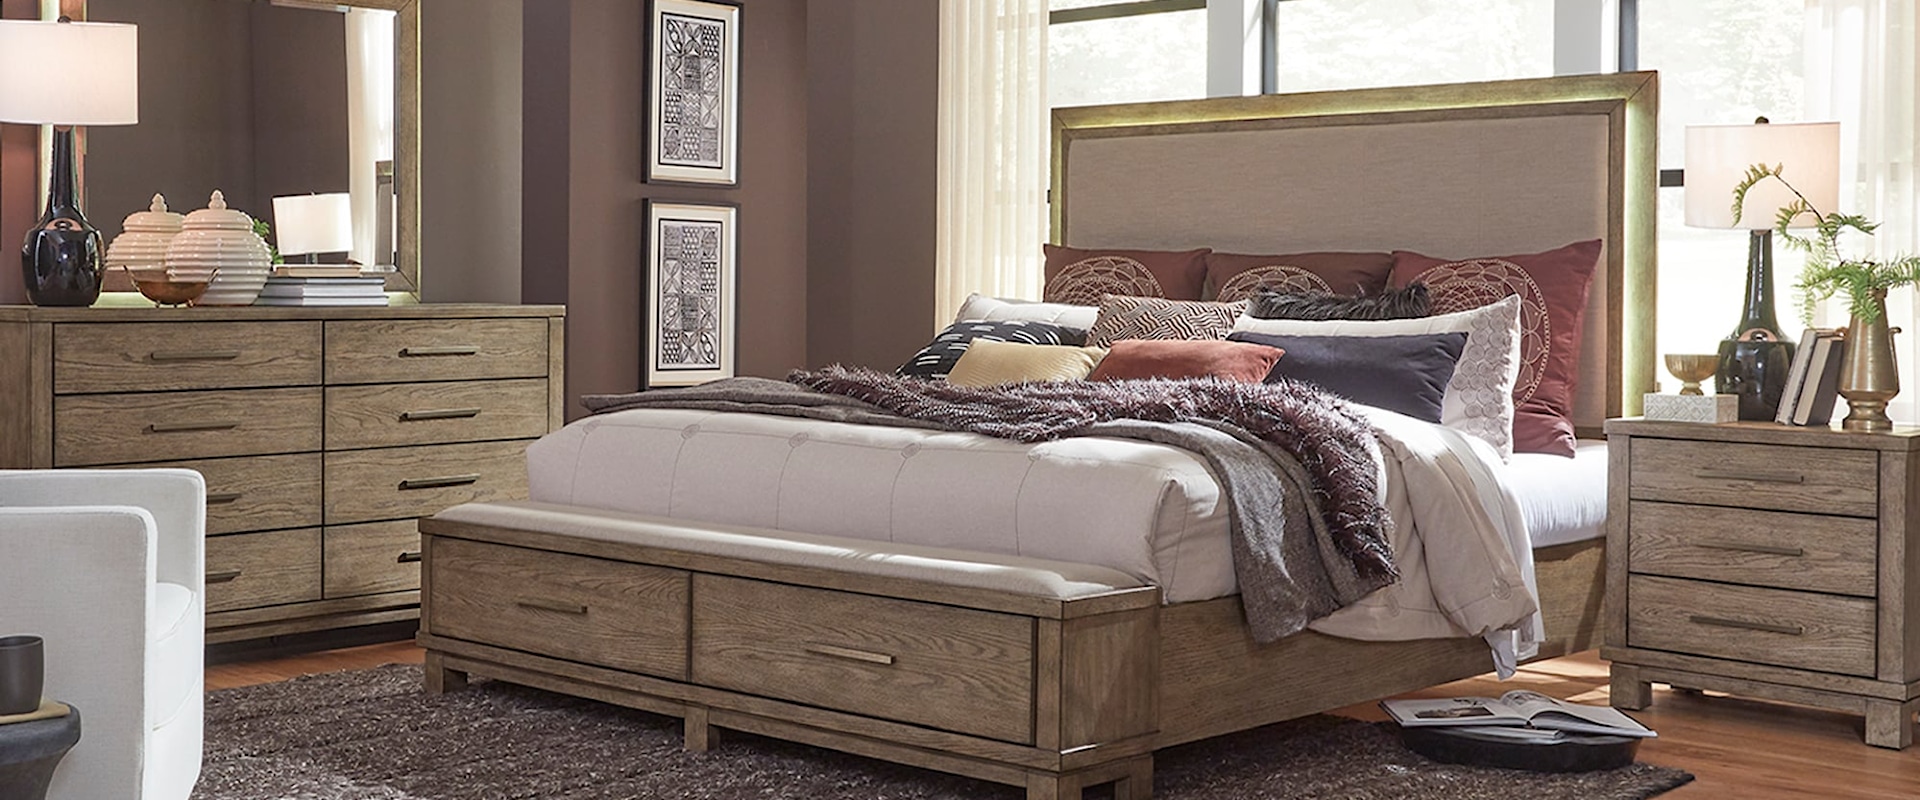 Contemporary 4-Piece King Bedroom Group 